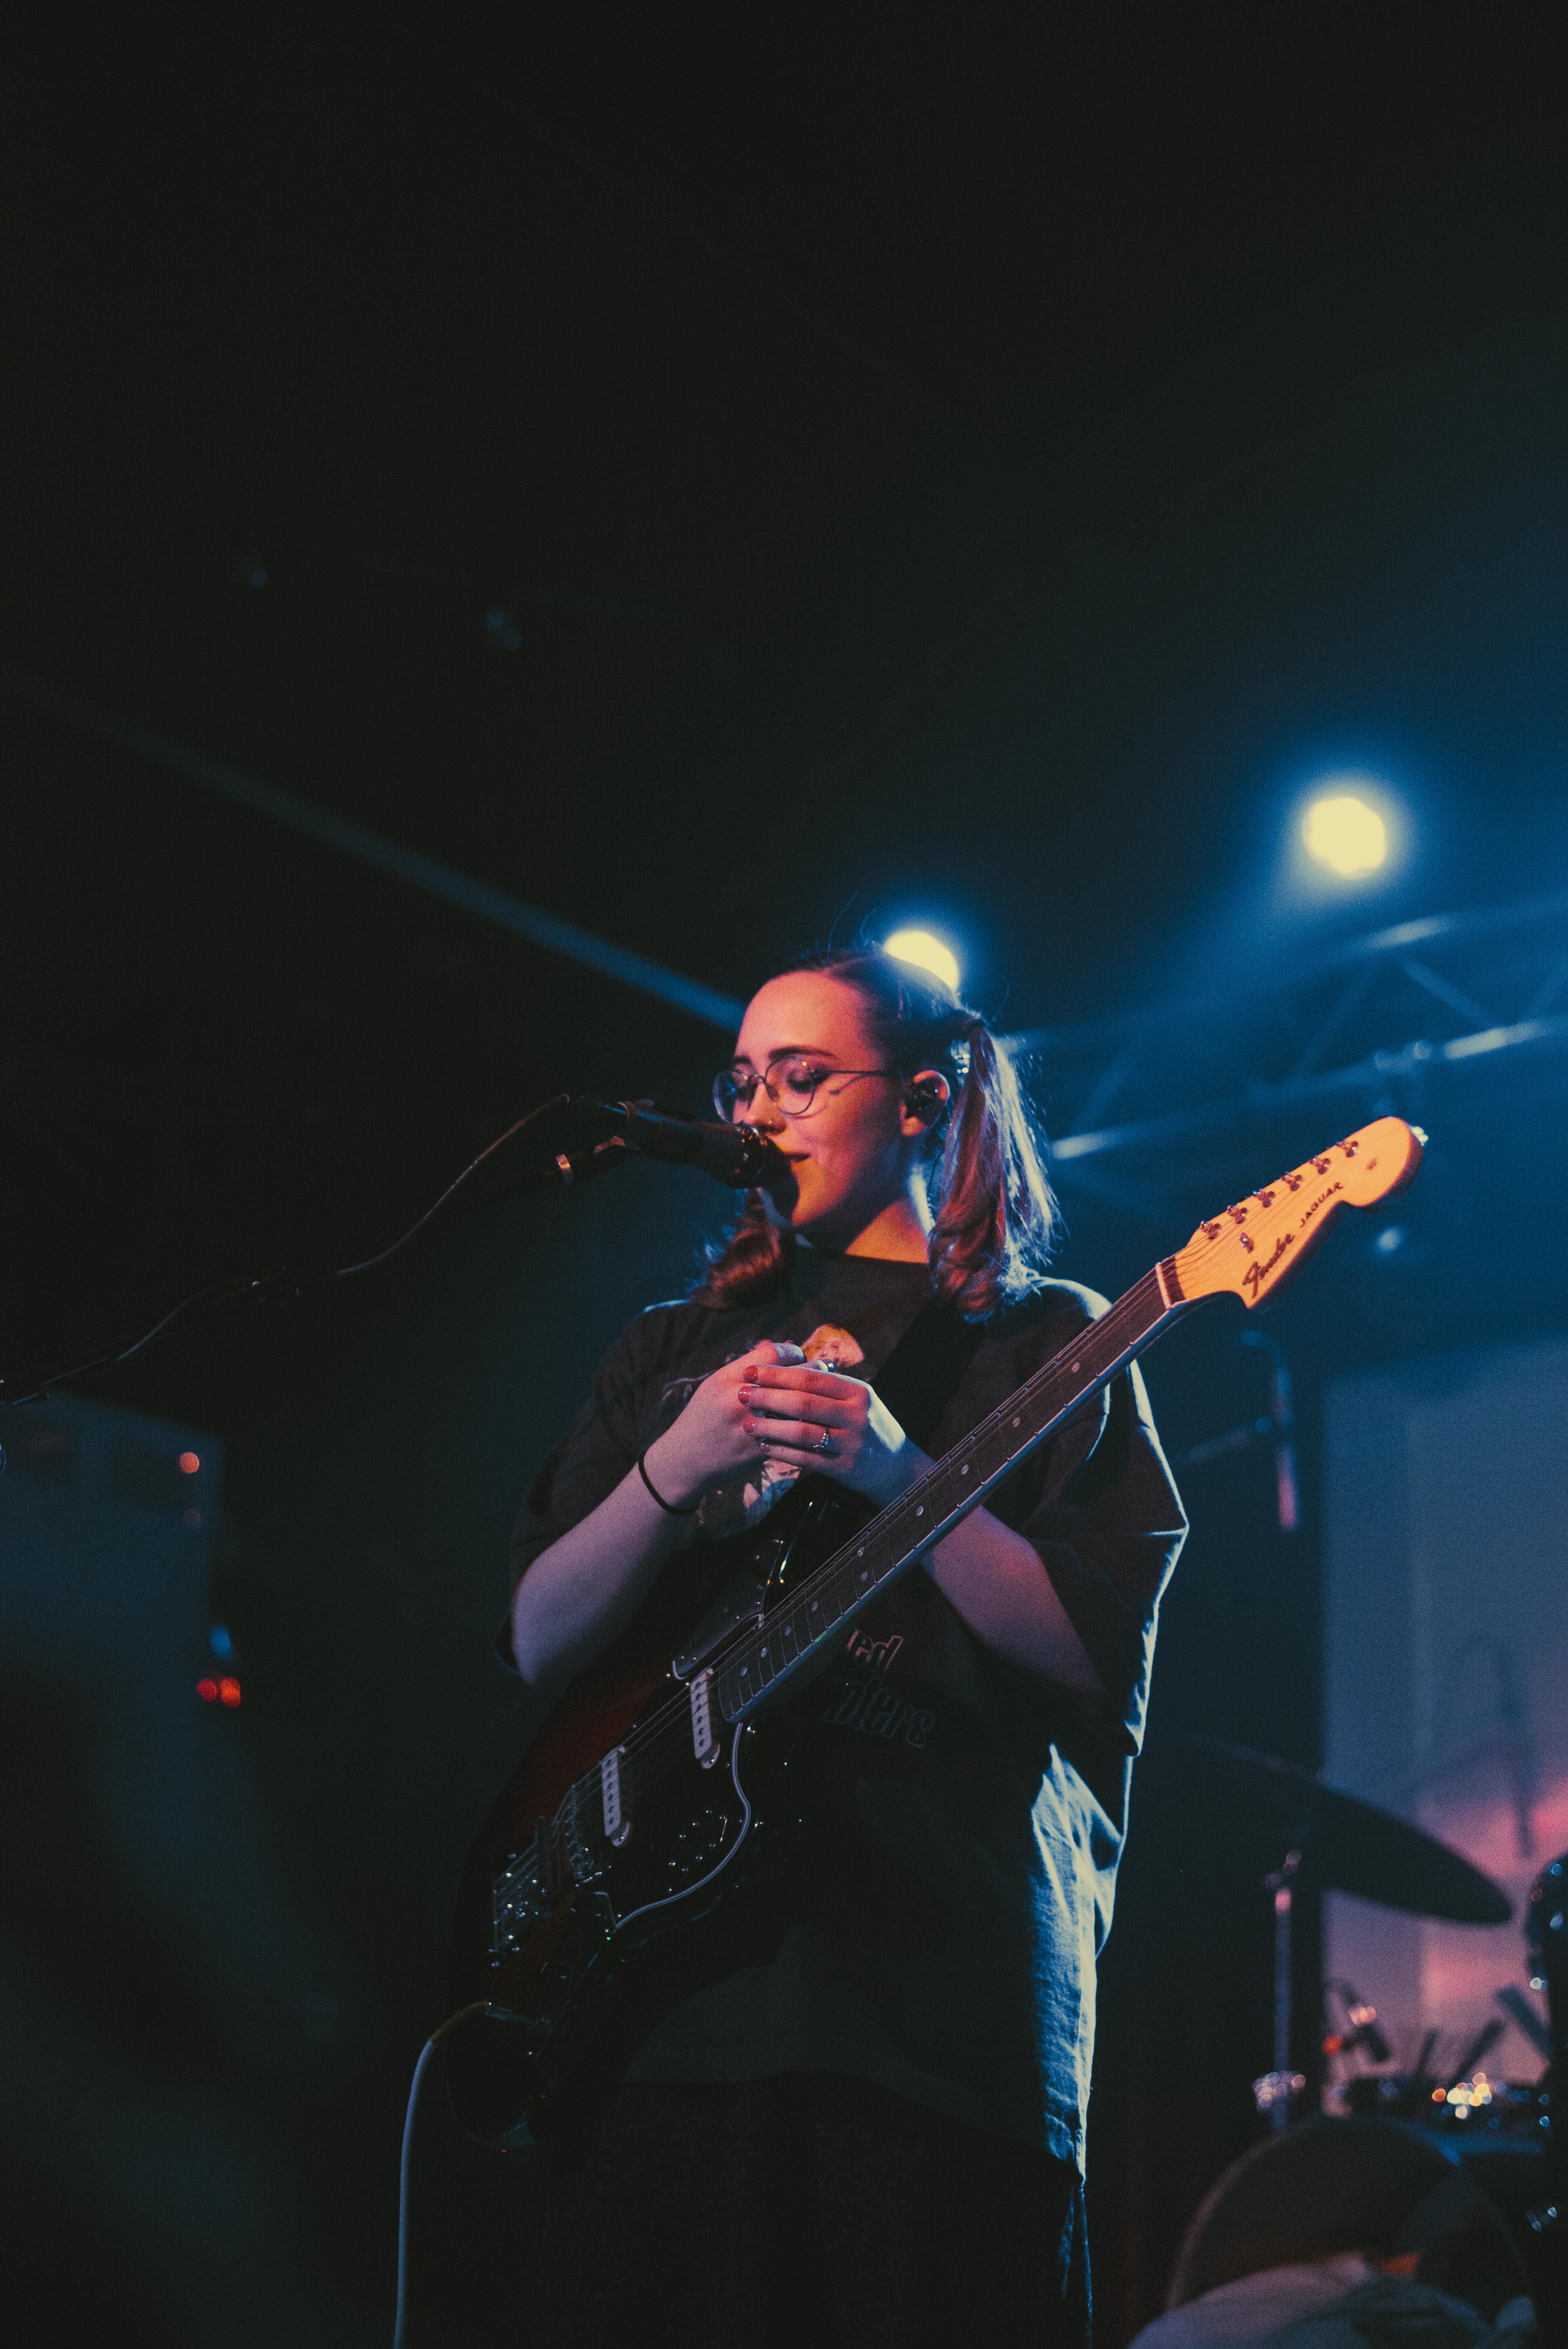 Soccer Mommy embraces vulnerabilities in electrifying set at Brighton Music Hall